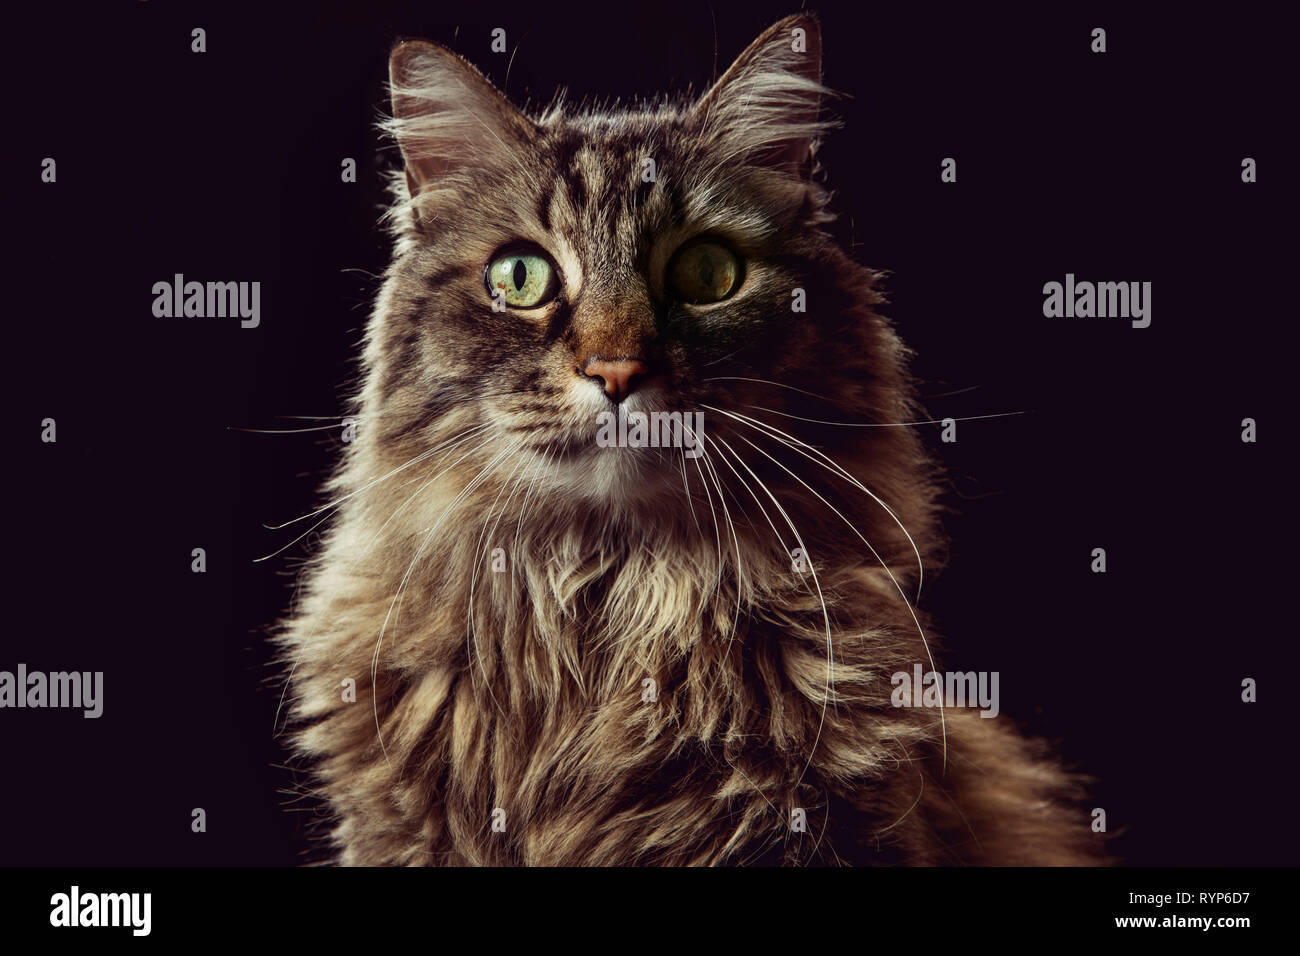 Close-up studio portrait of a brown tabby cat looking directly at camera on a black background. Stock Photo